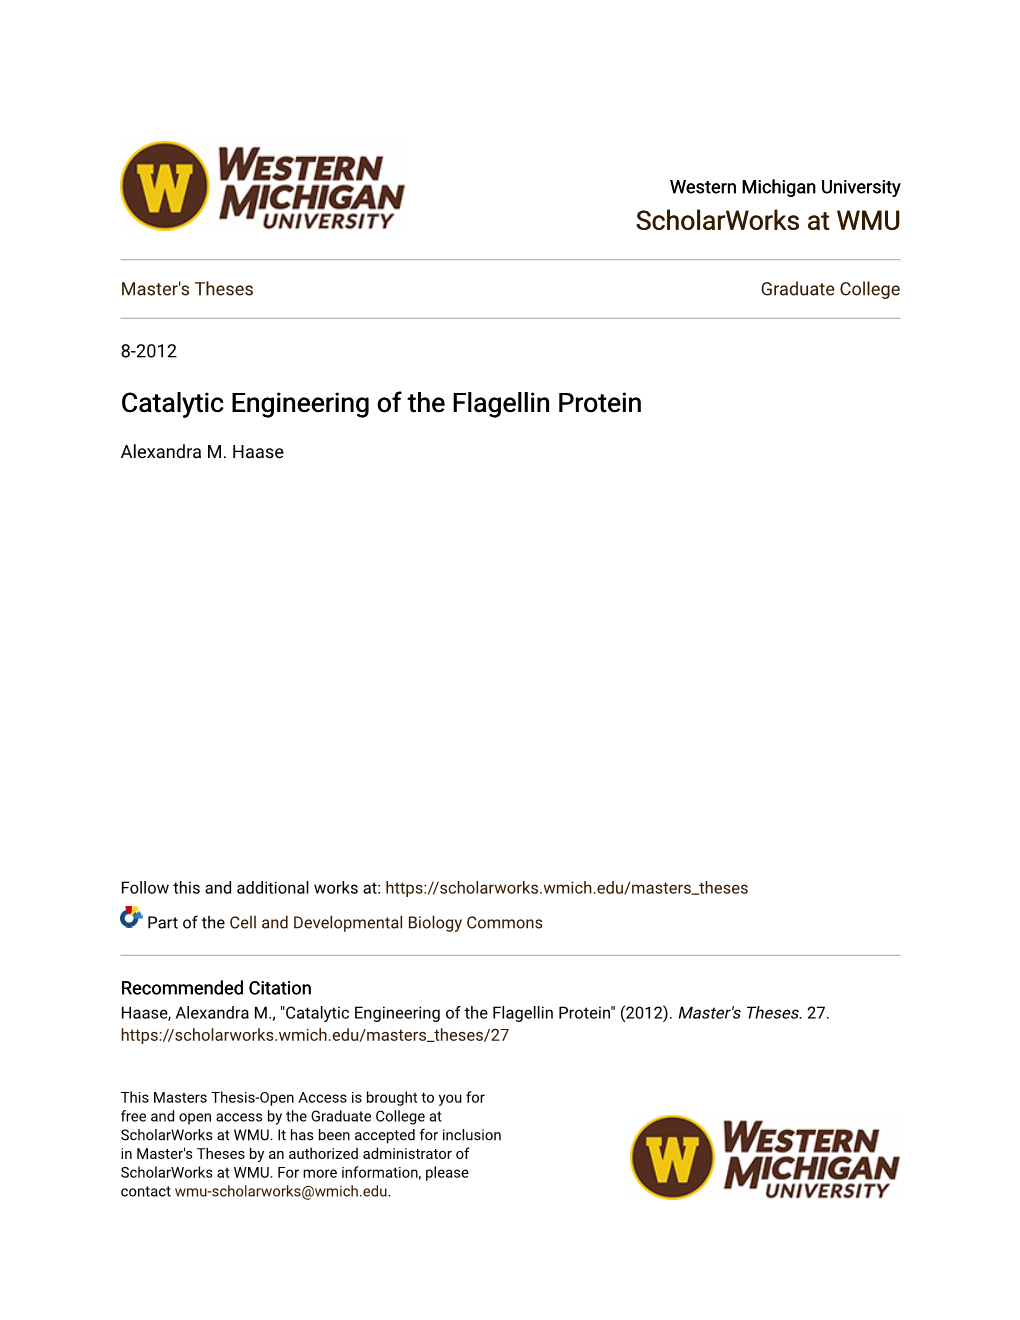 Catalytic Engineering of the Flagellin Protein